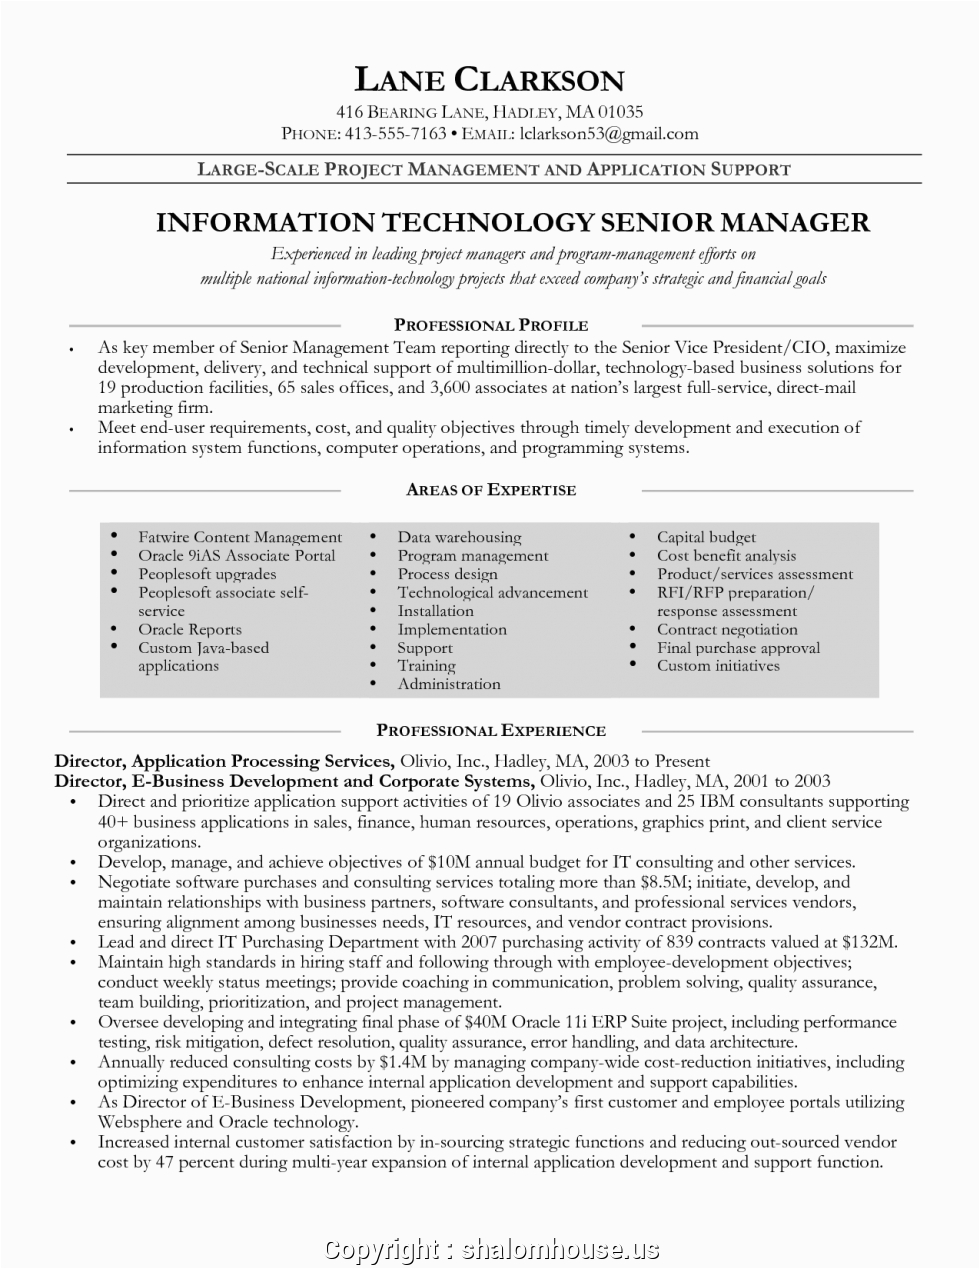 Entry Level Project Manager Sample Resume Unique Entry Level Project Manager Resume Sample